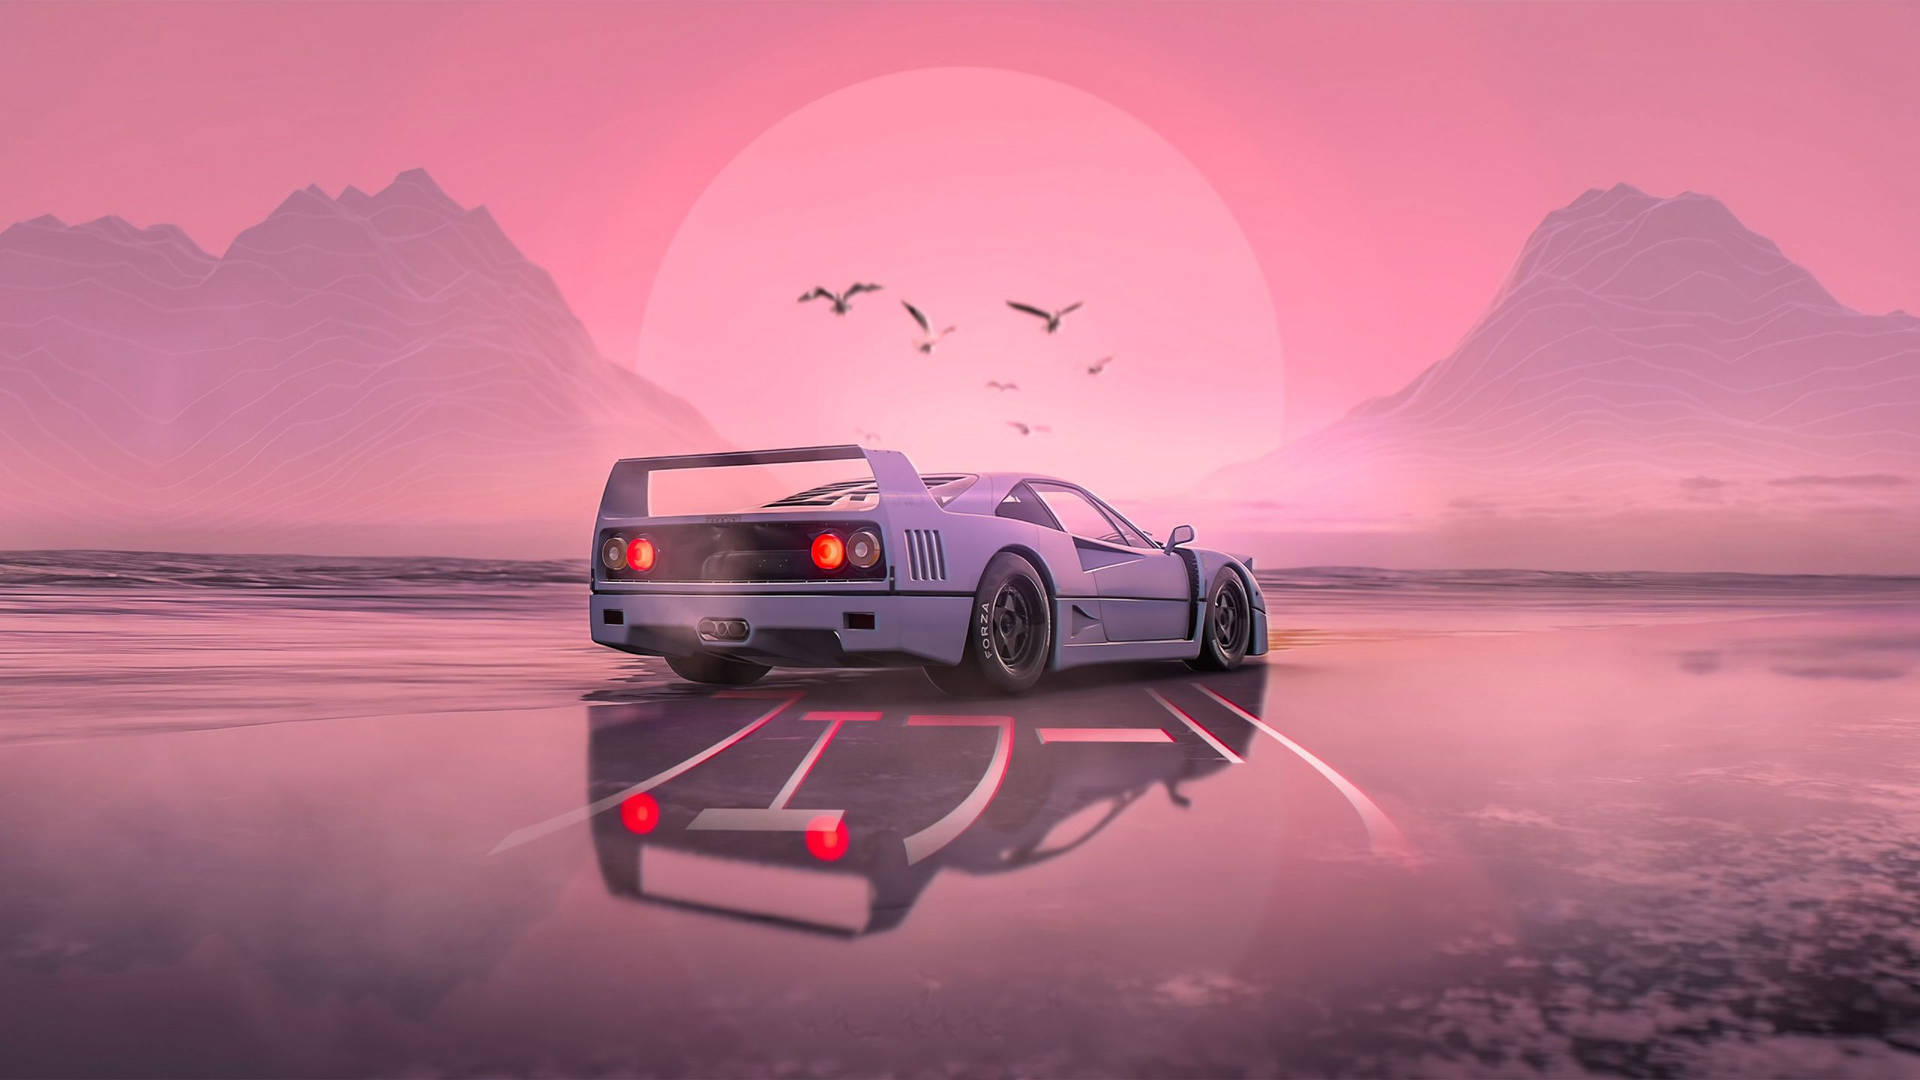 Pink Aesthetic Anime Car Background